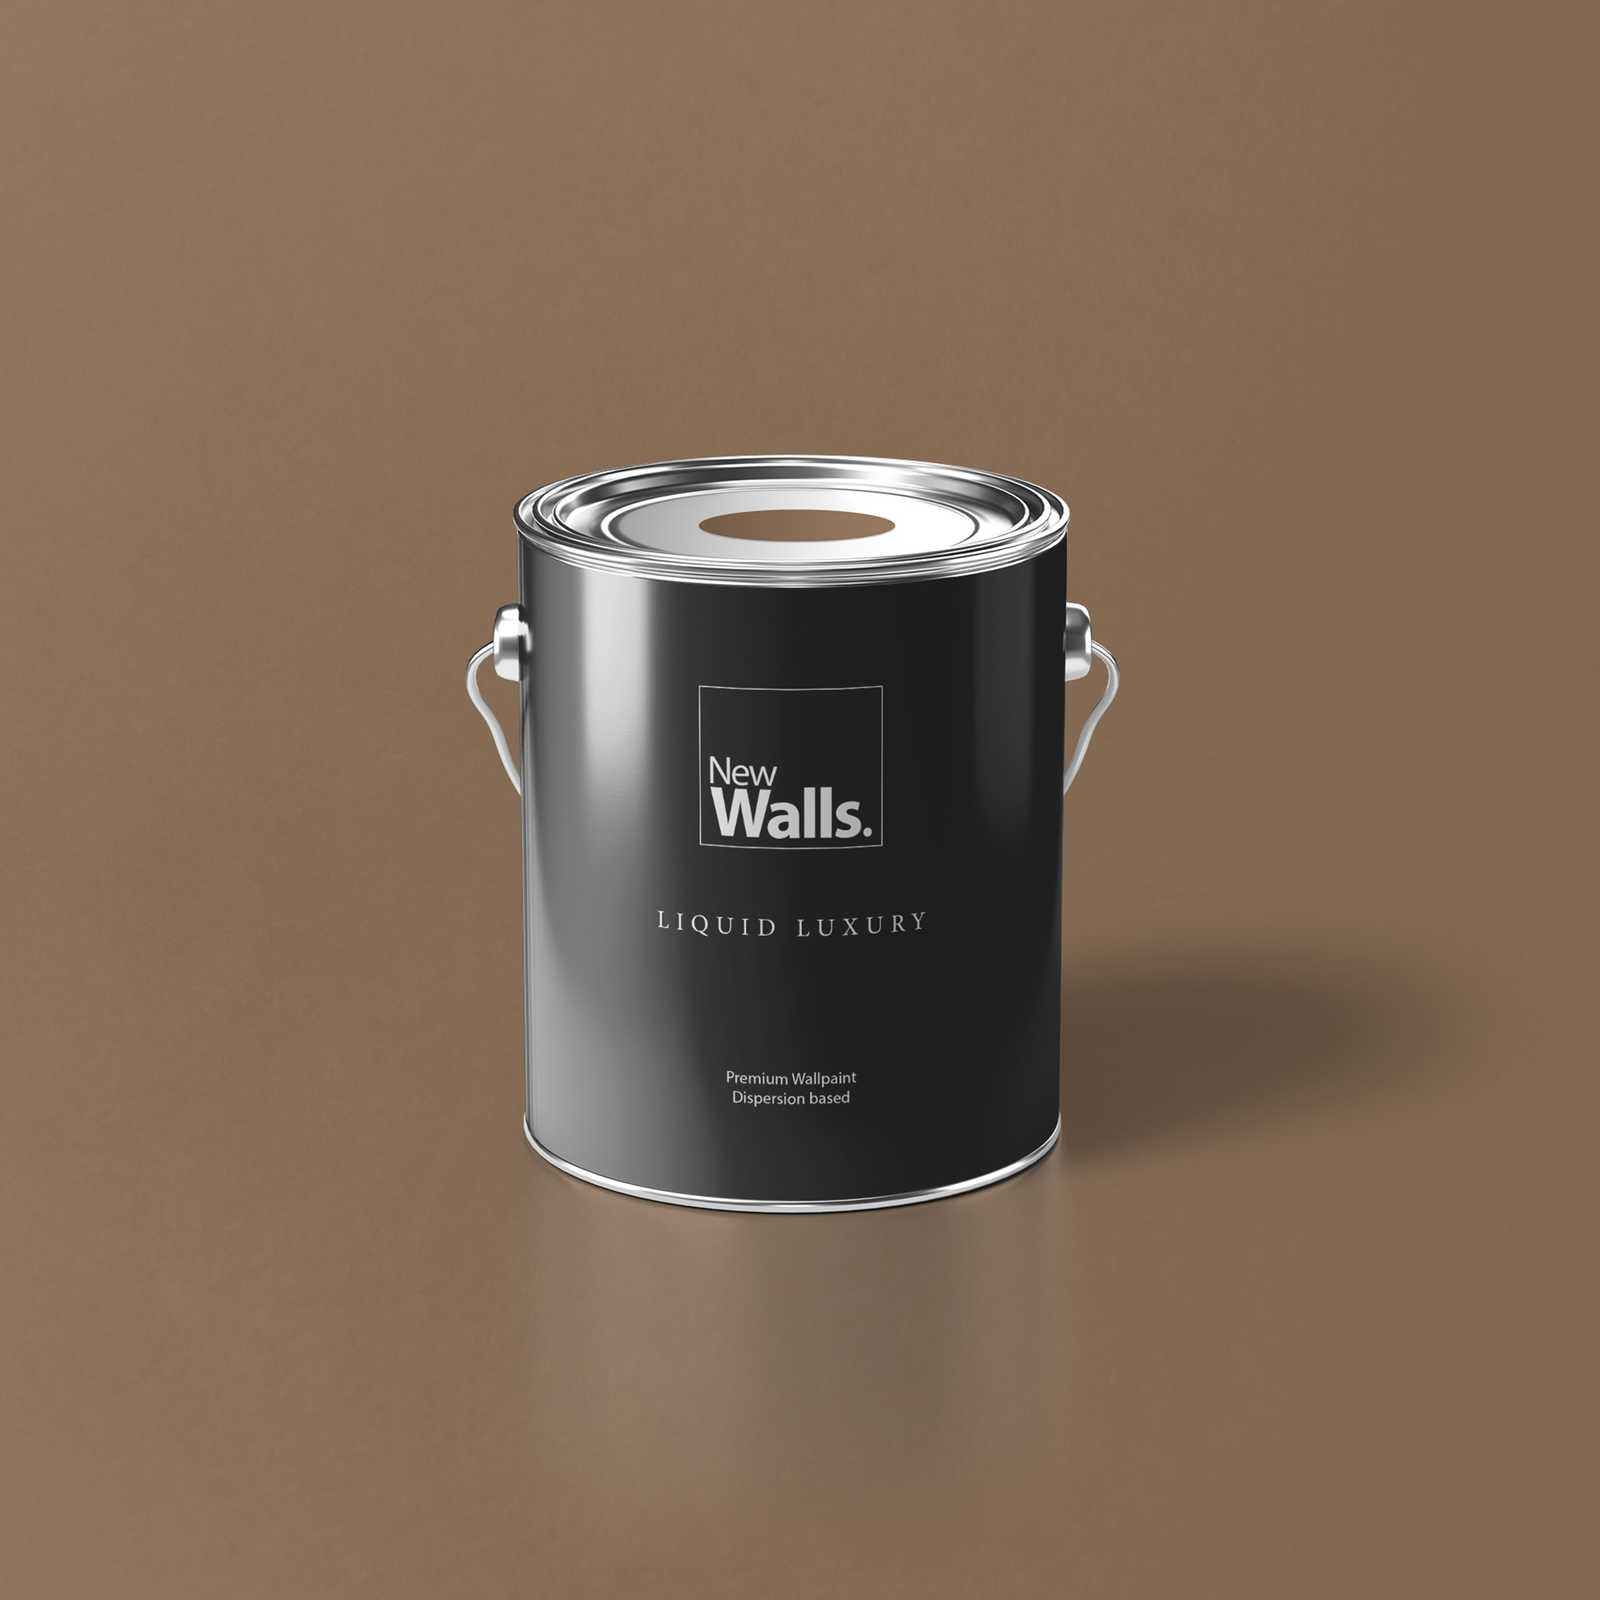 Premium Wall Paint Soothing Light Brown »Modern Mud« NW719 – 2.5 litre
